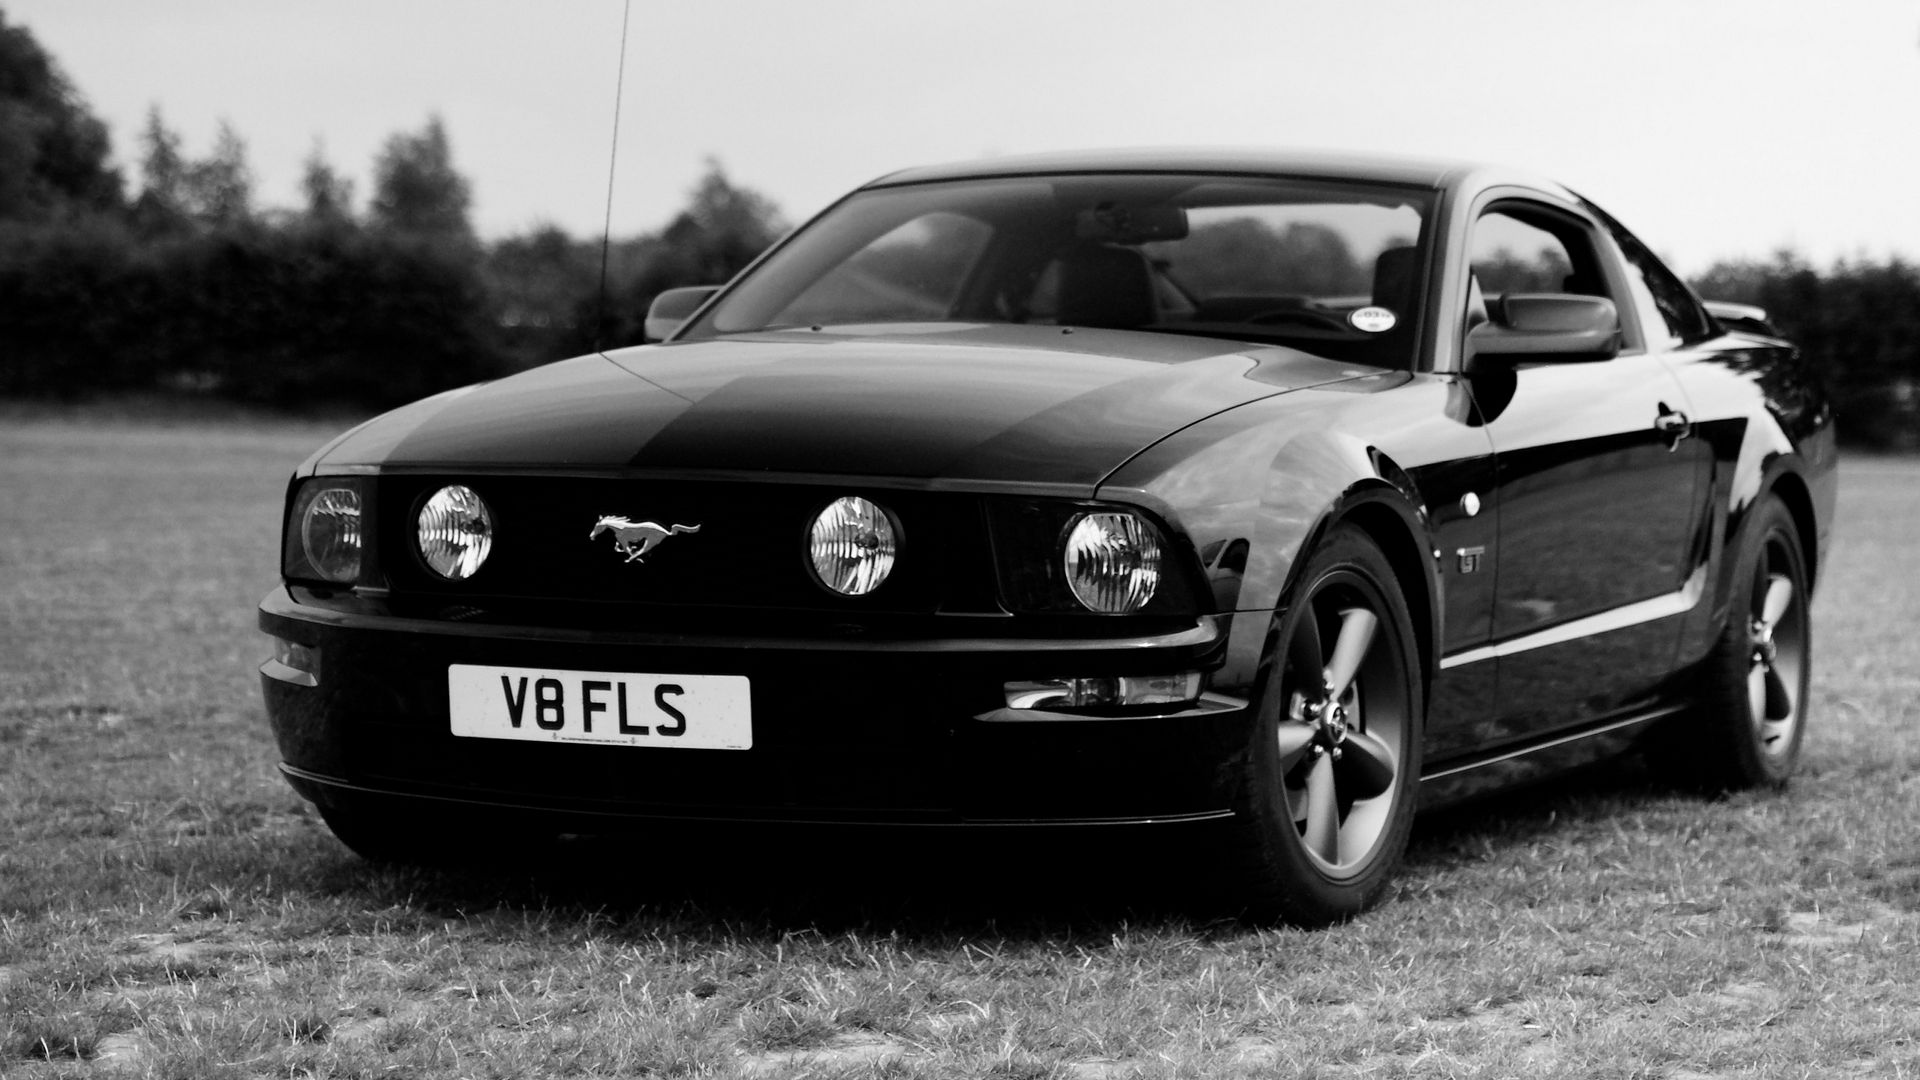 Download Wallpaper 1920x1080 Ford Mustang Ford Car Black Field